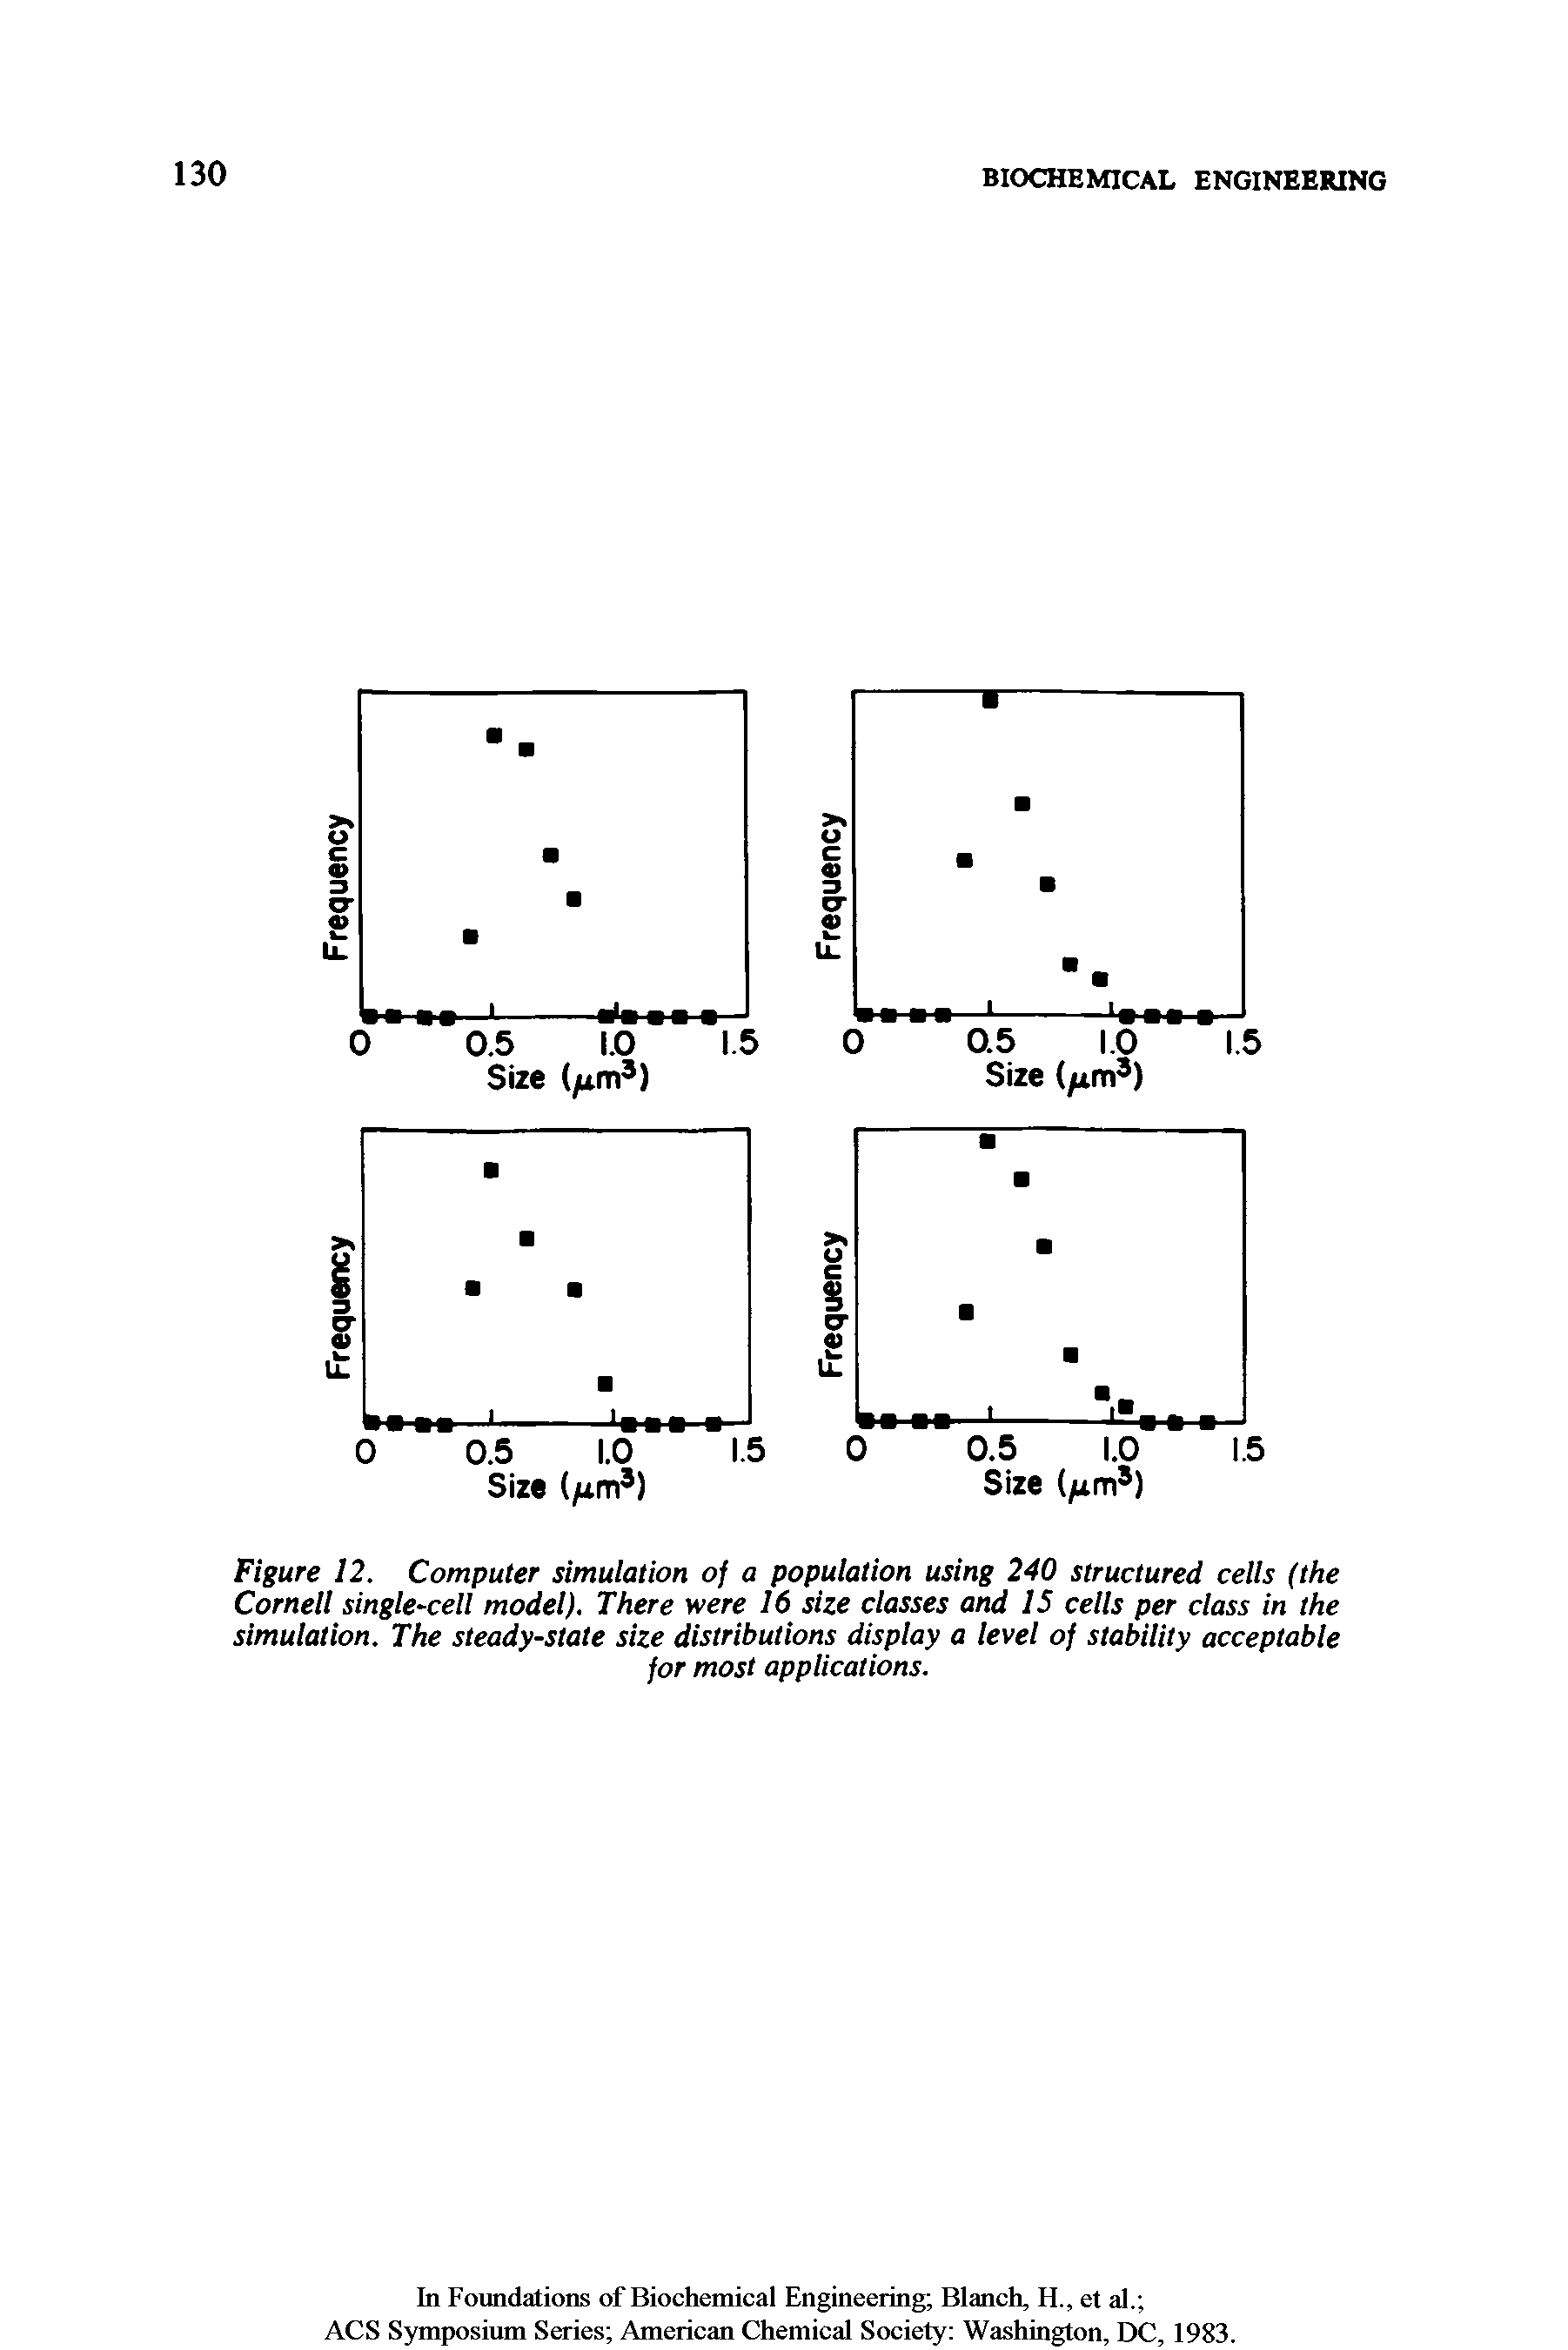 Figure 12. Computer simulation of a population using 240 structured cells (the Cornell single-cell model). There were 16 size classes and 15 cells per class in the simulation. The steady-state size distributions display a level of stability acceptable...